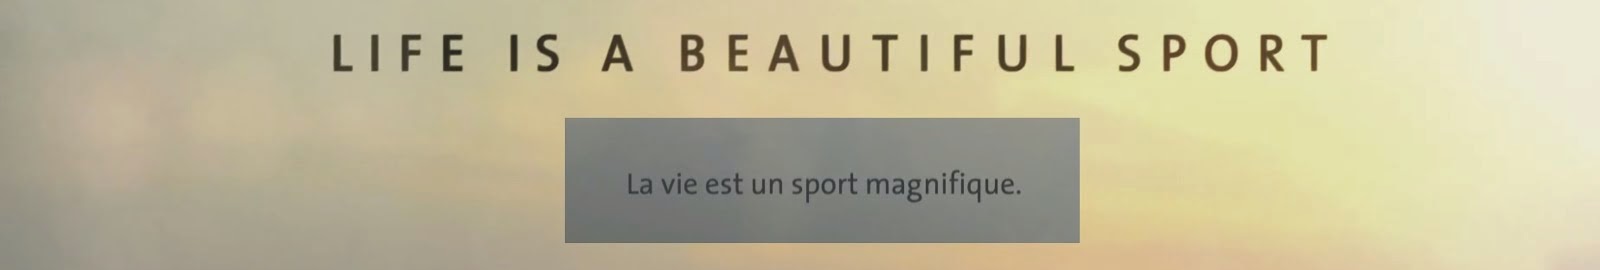 Life is a beautiful sport